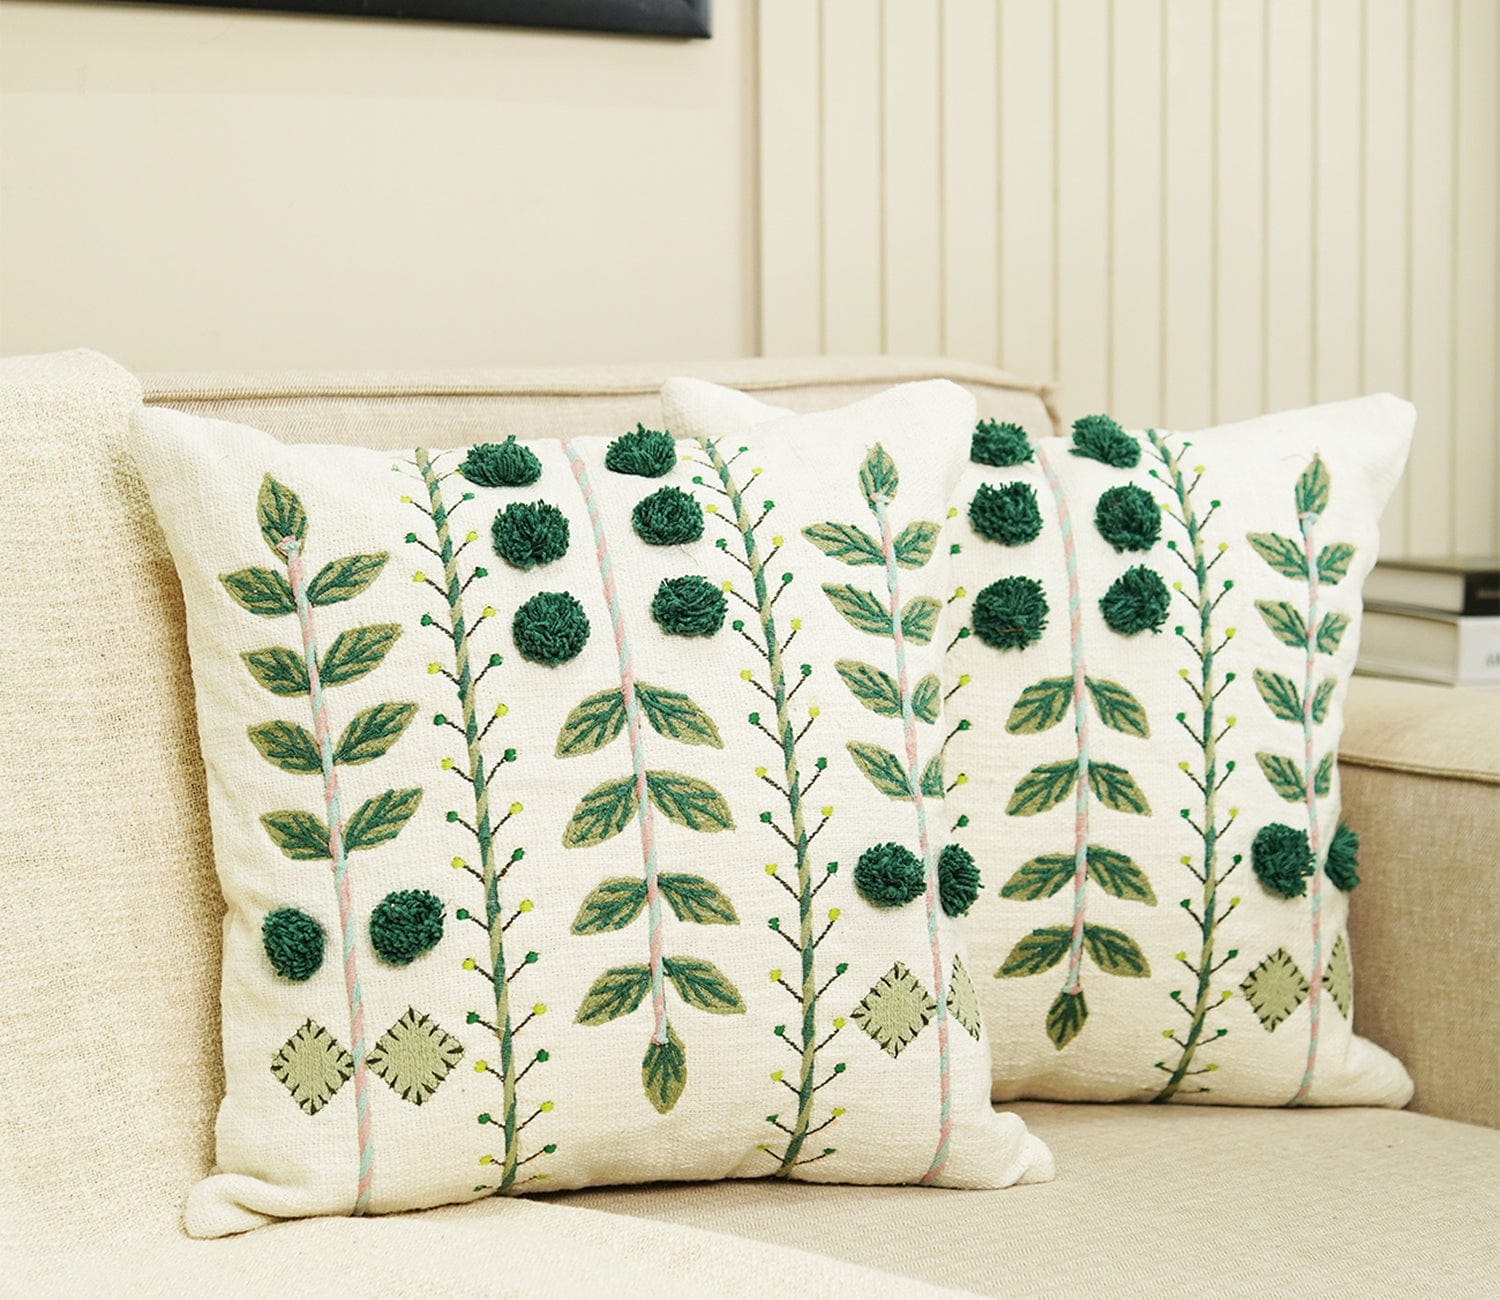 Embroidered Cotton Cushion Covers Set of 2 (Teal Green,18 x 18 inch)